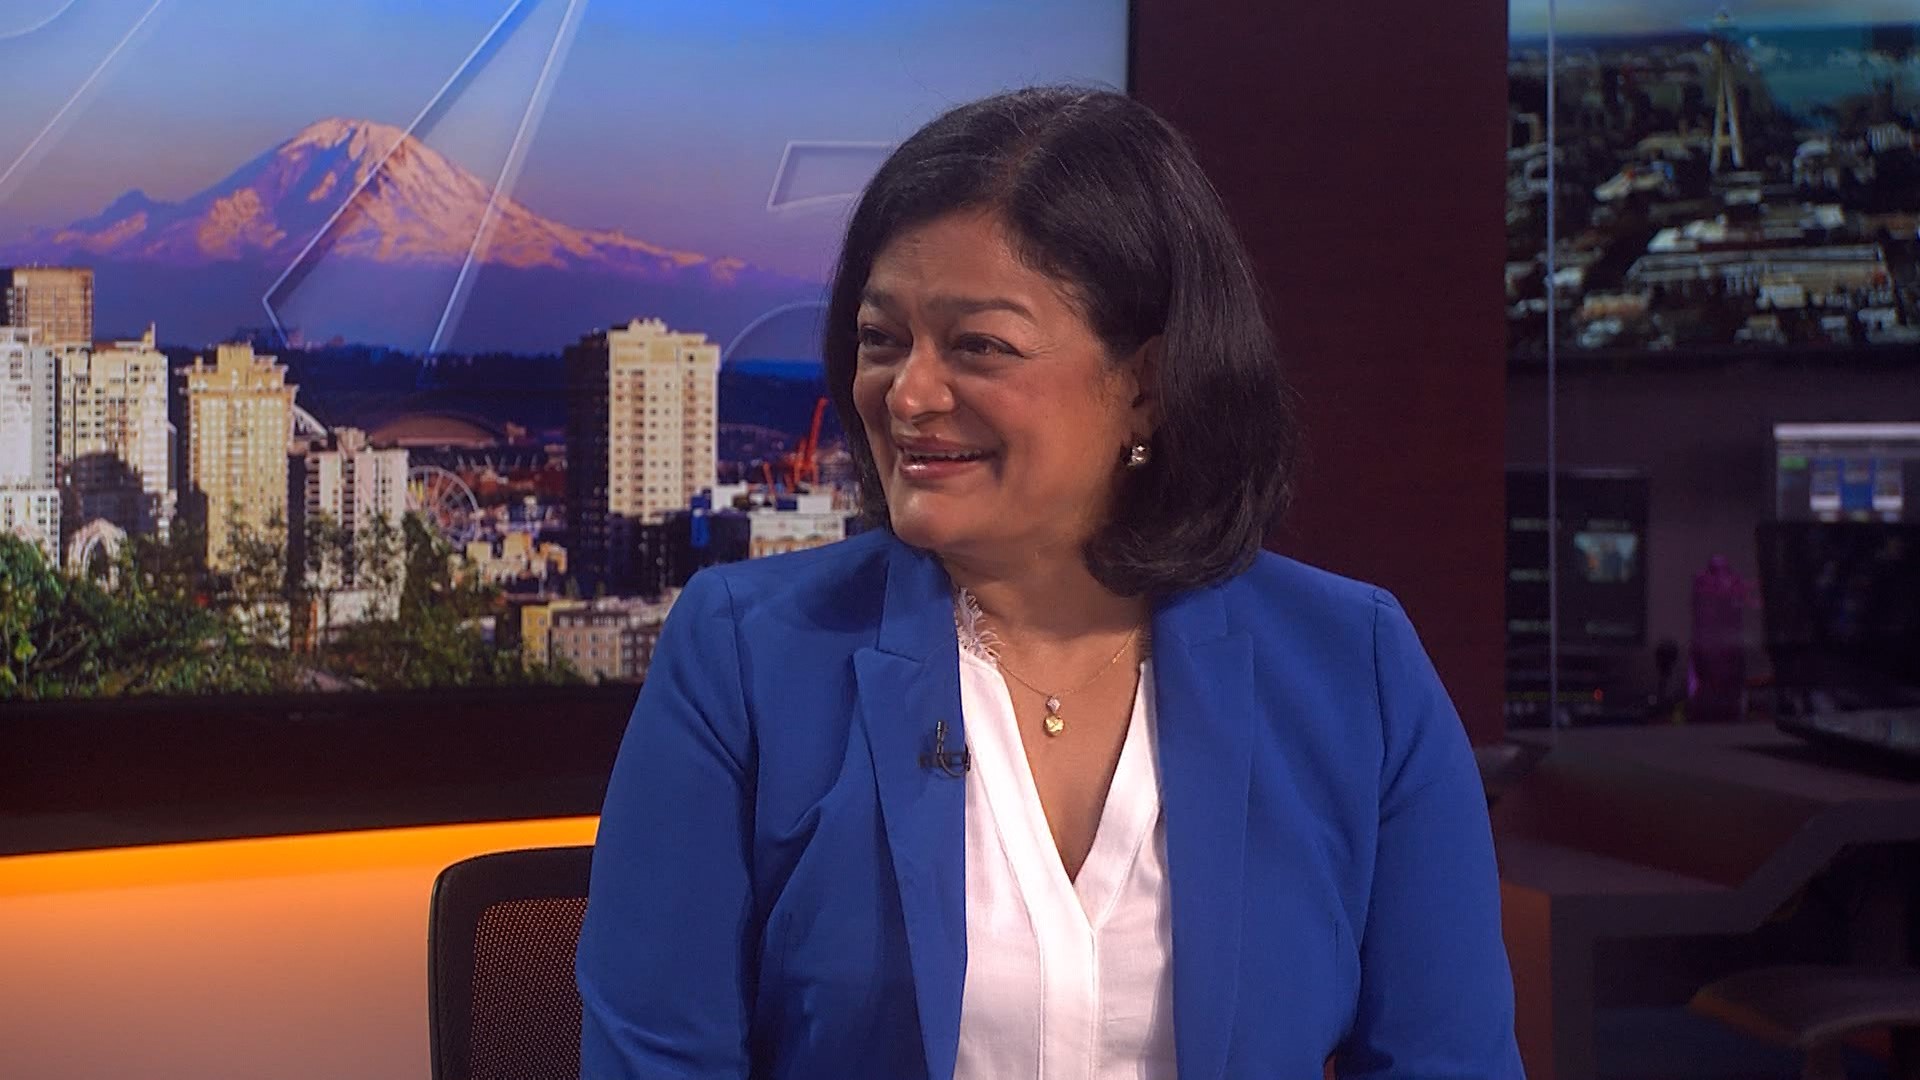 EXTENDED INTERVIEW Jayapal discusses Jan. 6 ahead of anniversary